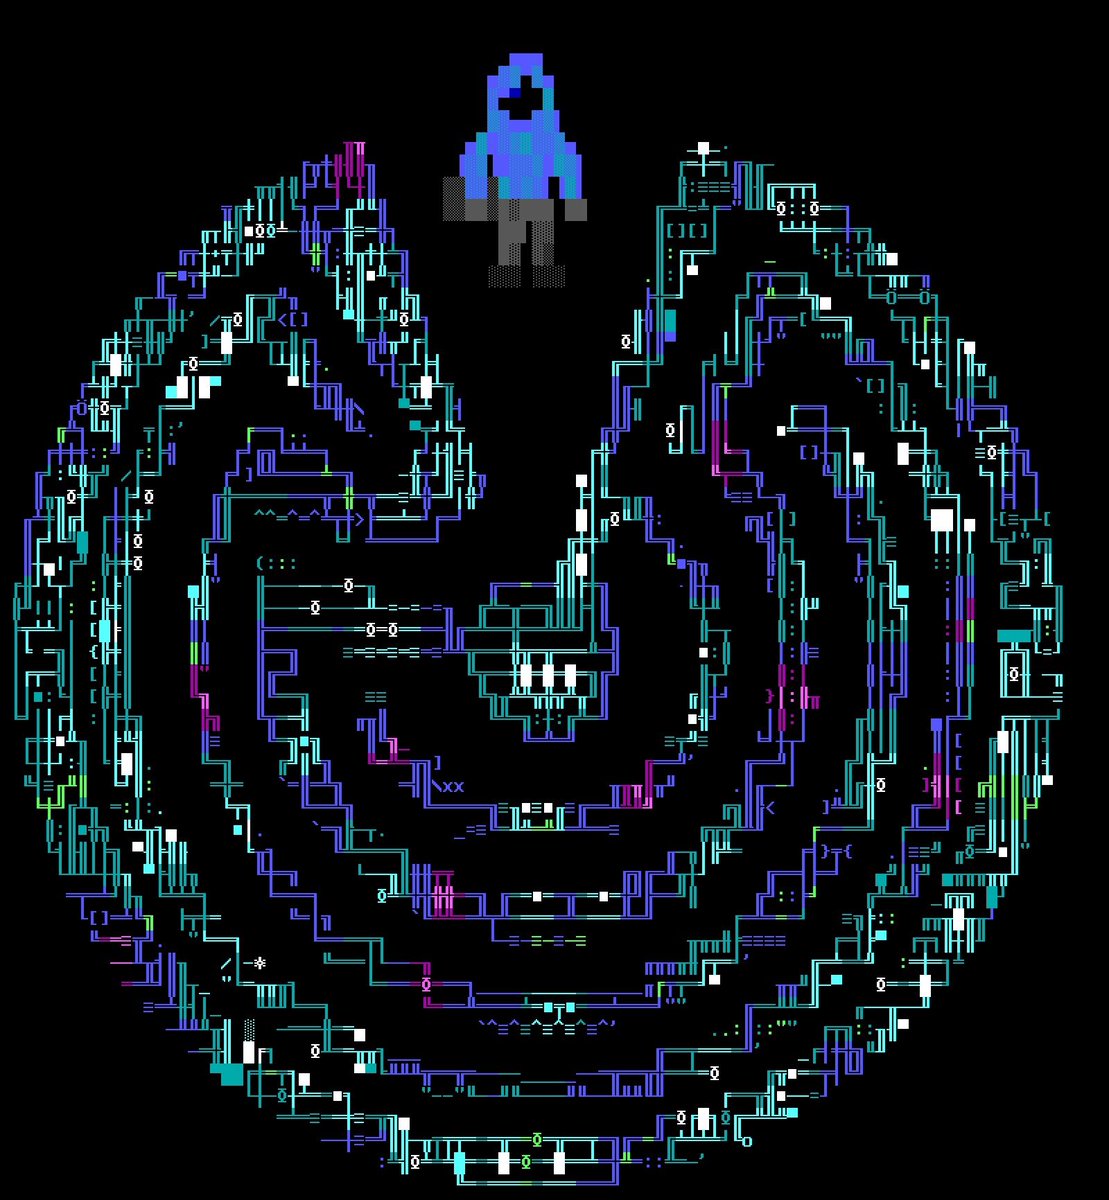 Time lapse creation video of @CypherCon ‘s design. Done in #moebious. m.youtube.com/watch?time_con… #ansiart #timelapse #ansi #bbs